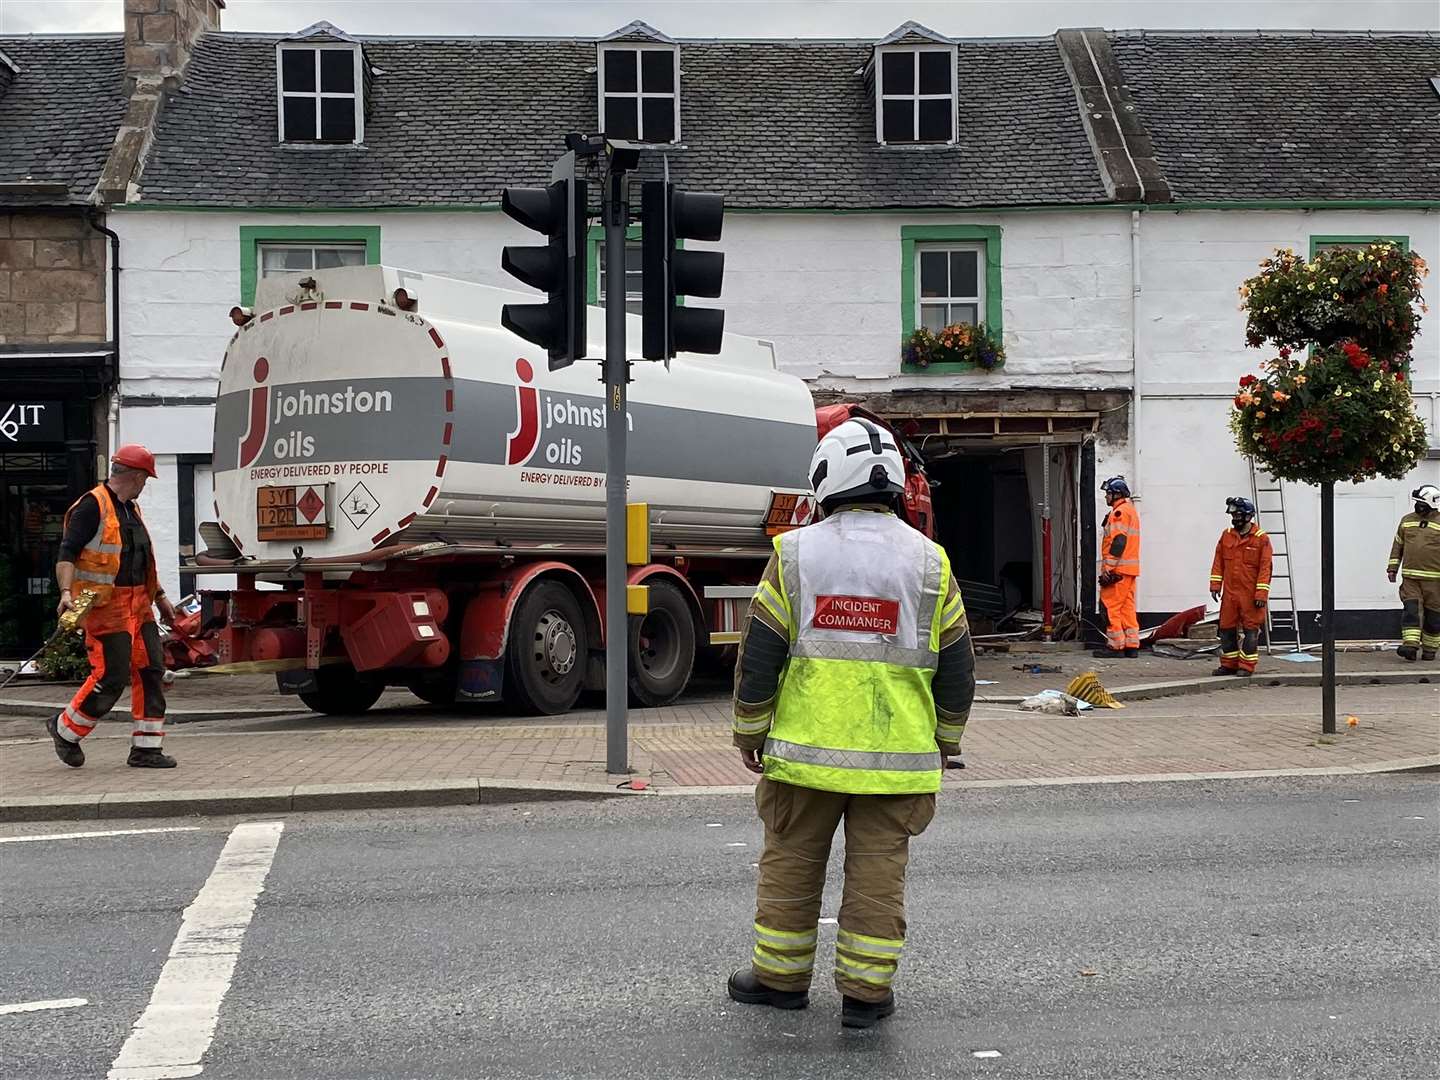 Oil tanker being removed from Beauly shop.